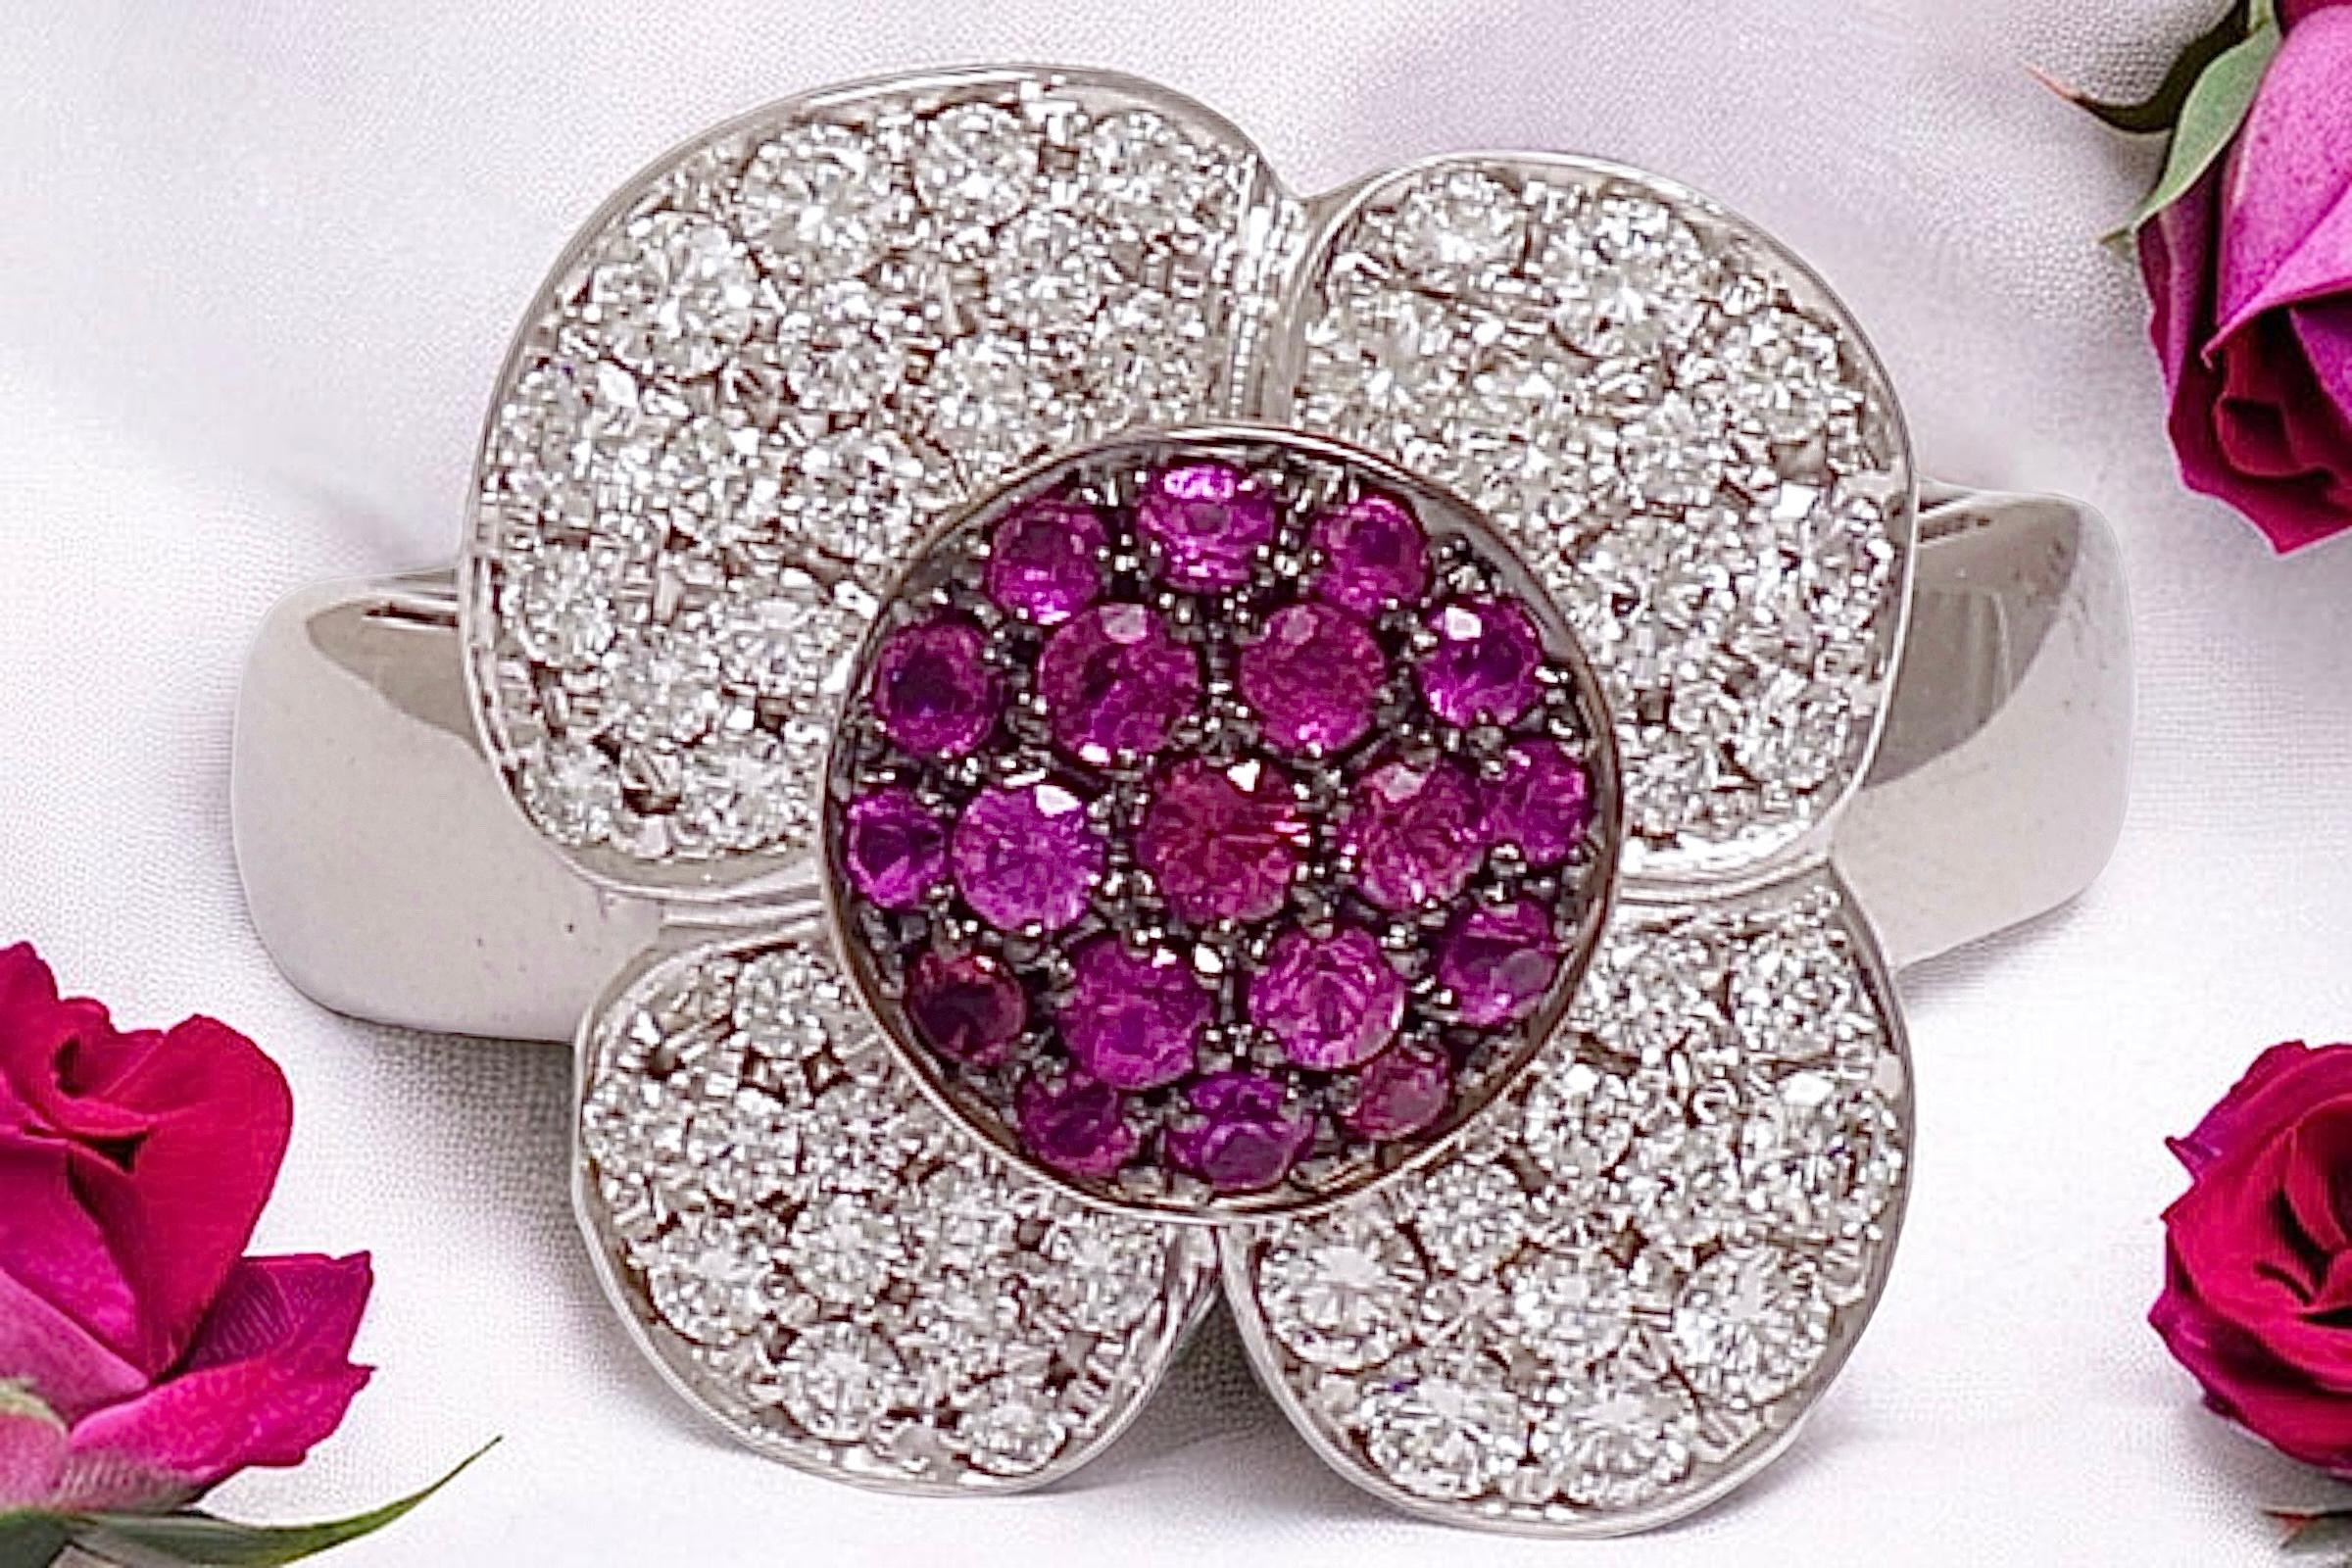  18 kt. White Gold Flower Shape Ring with 1 ct. Diamonds & 0.5 ct. Pink Sapphire For Sale 3